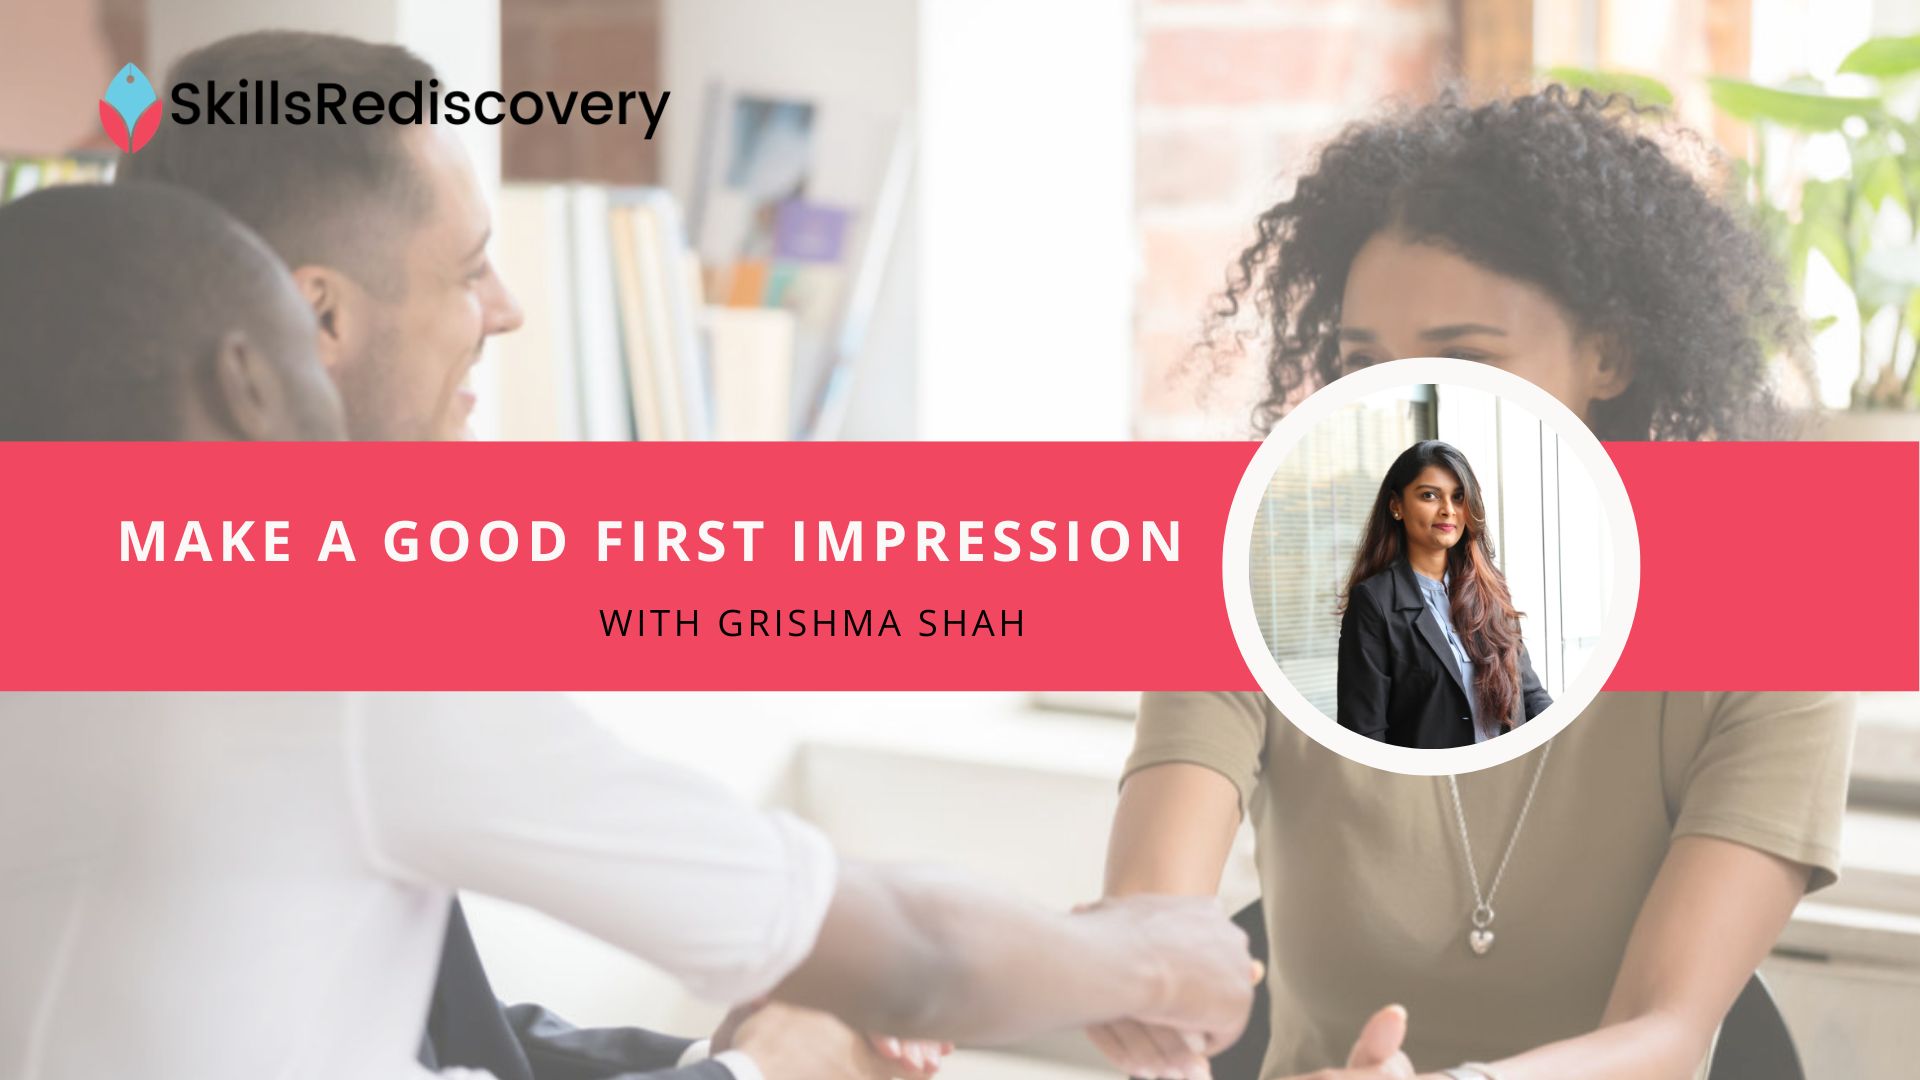 Learn How to Make a Good First Impression | Skillsrediscovery